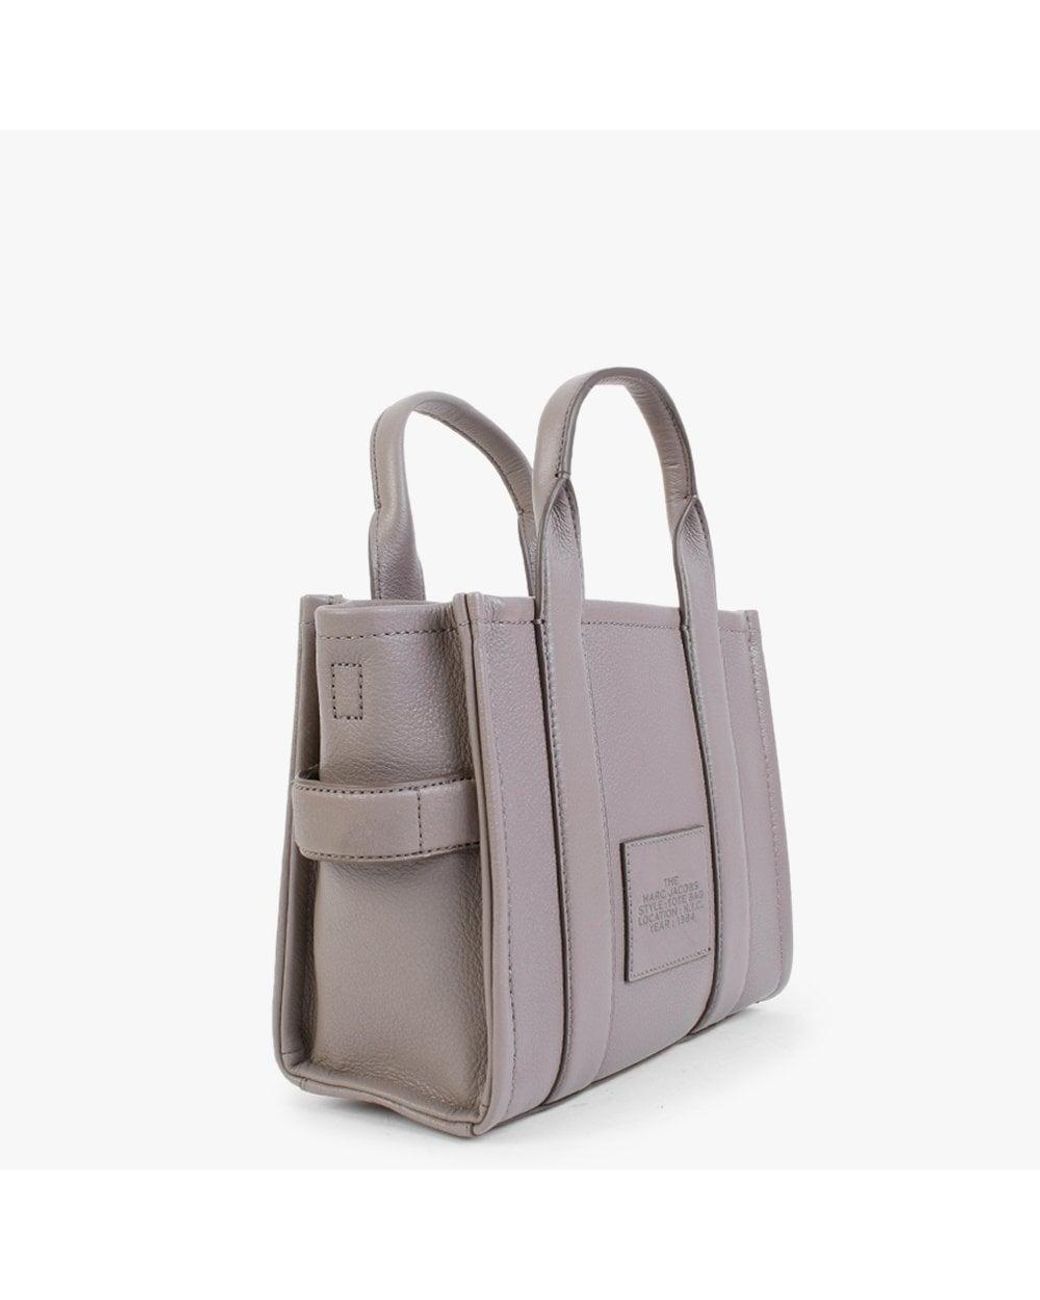 Marc Jacobs The Leather Mini Cement Tote Bag in Gray | Lyst